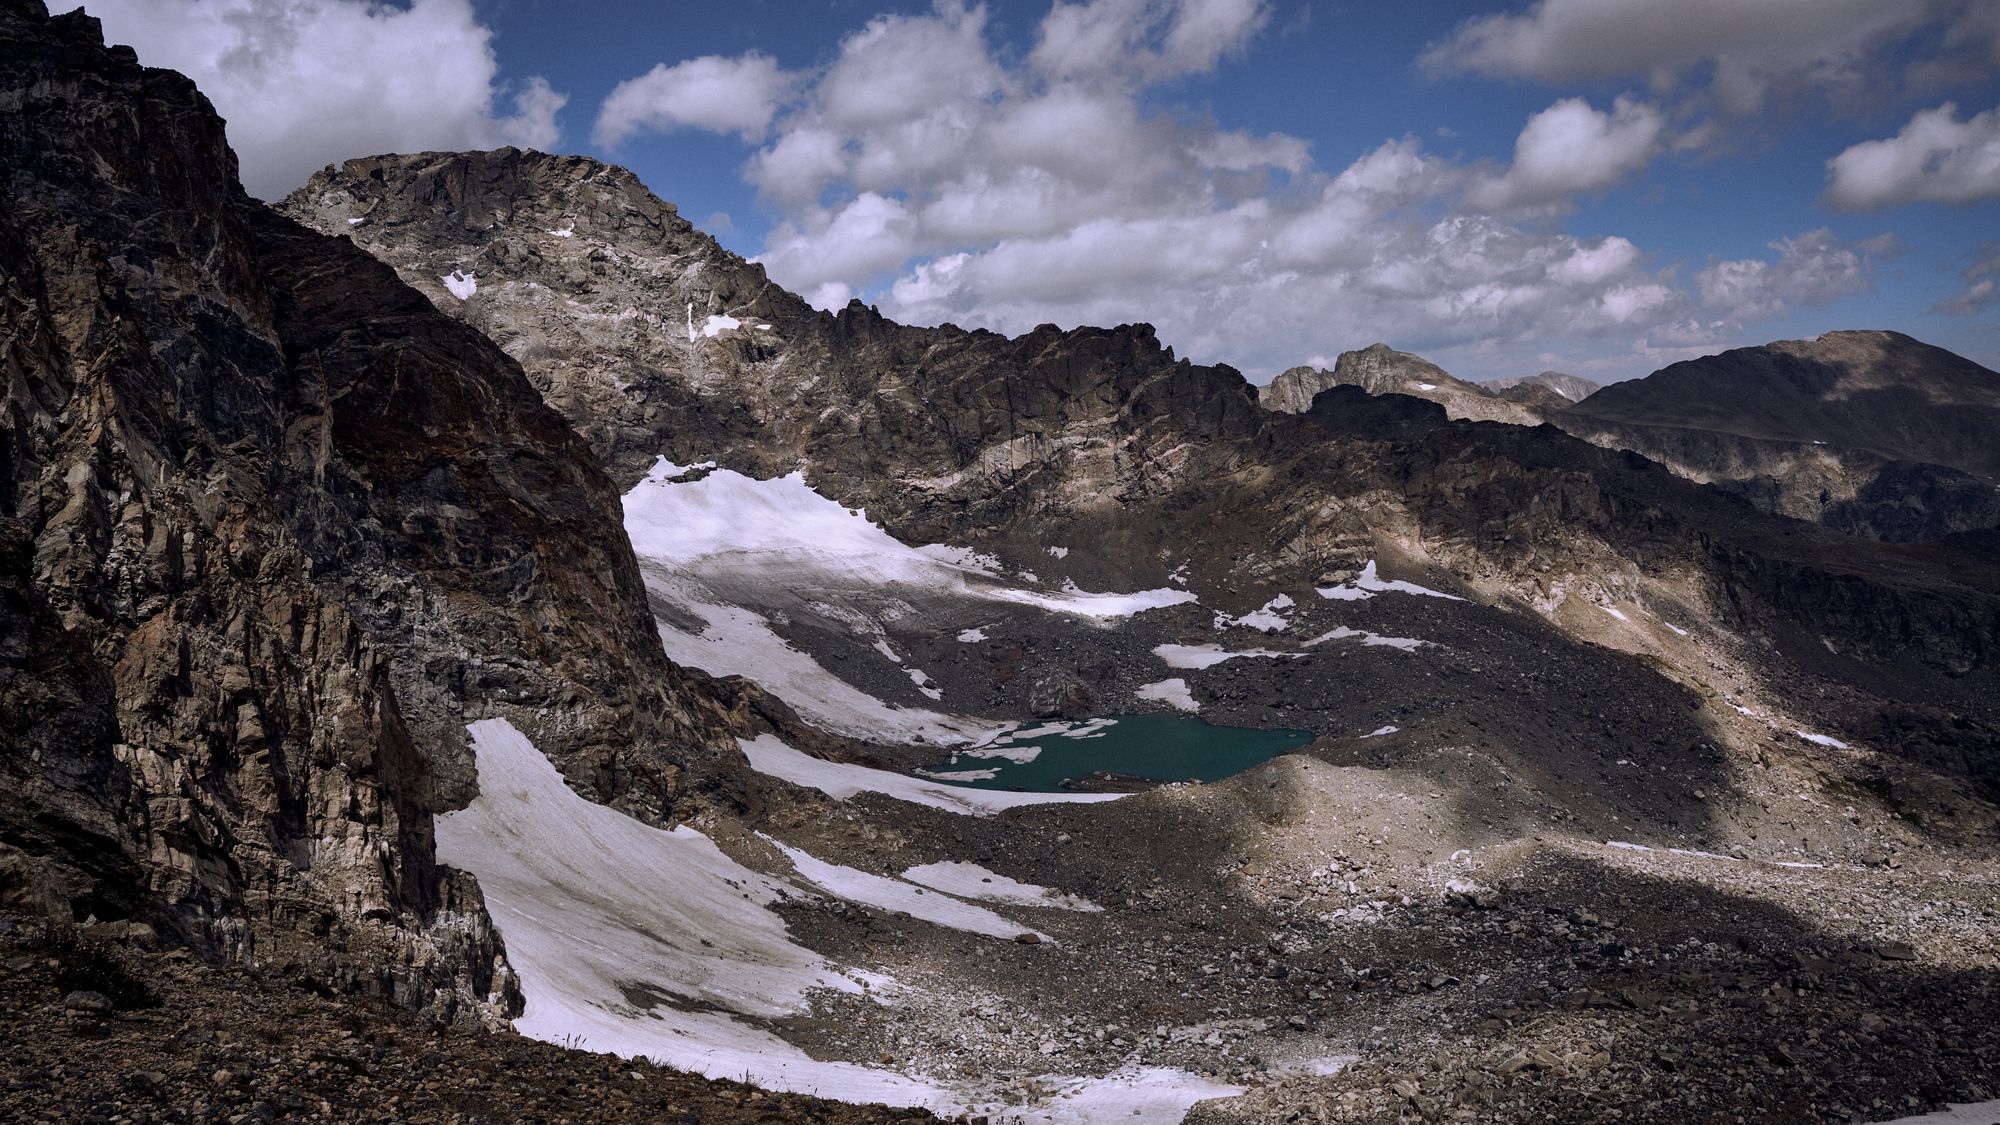 Photo of mountains, clouds, and a small lake. The North Arapaho peak taken from the South Arapaho peak.